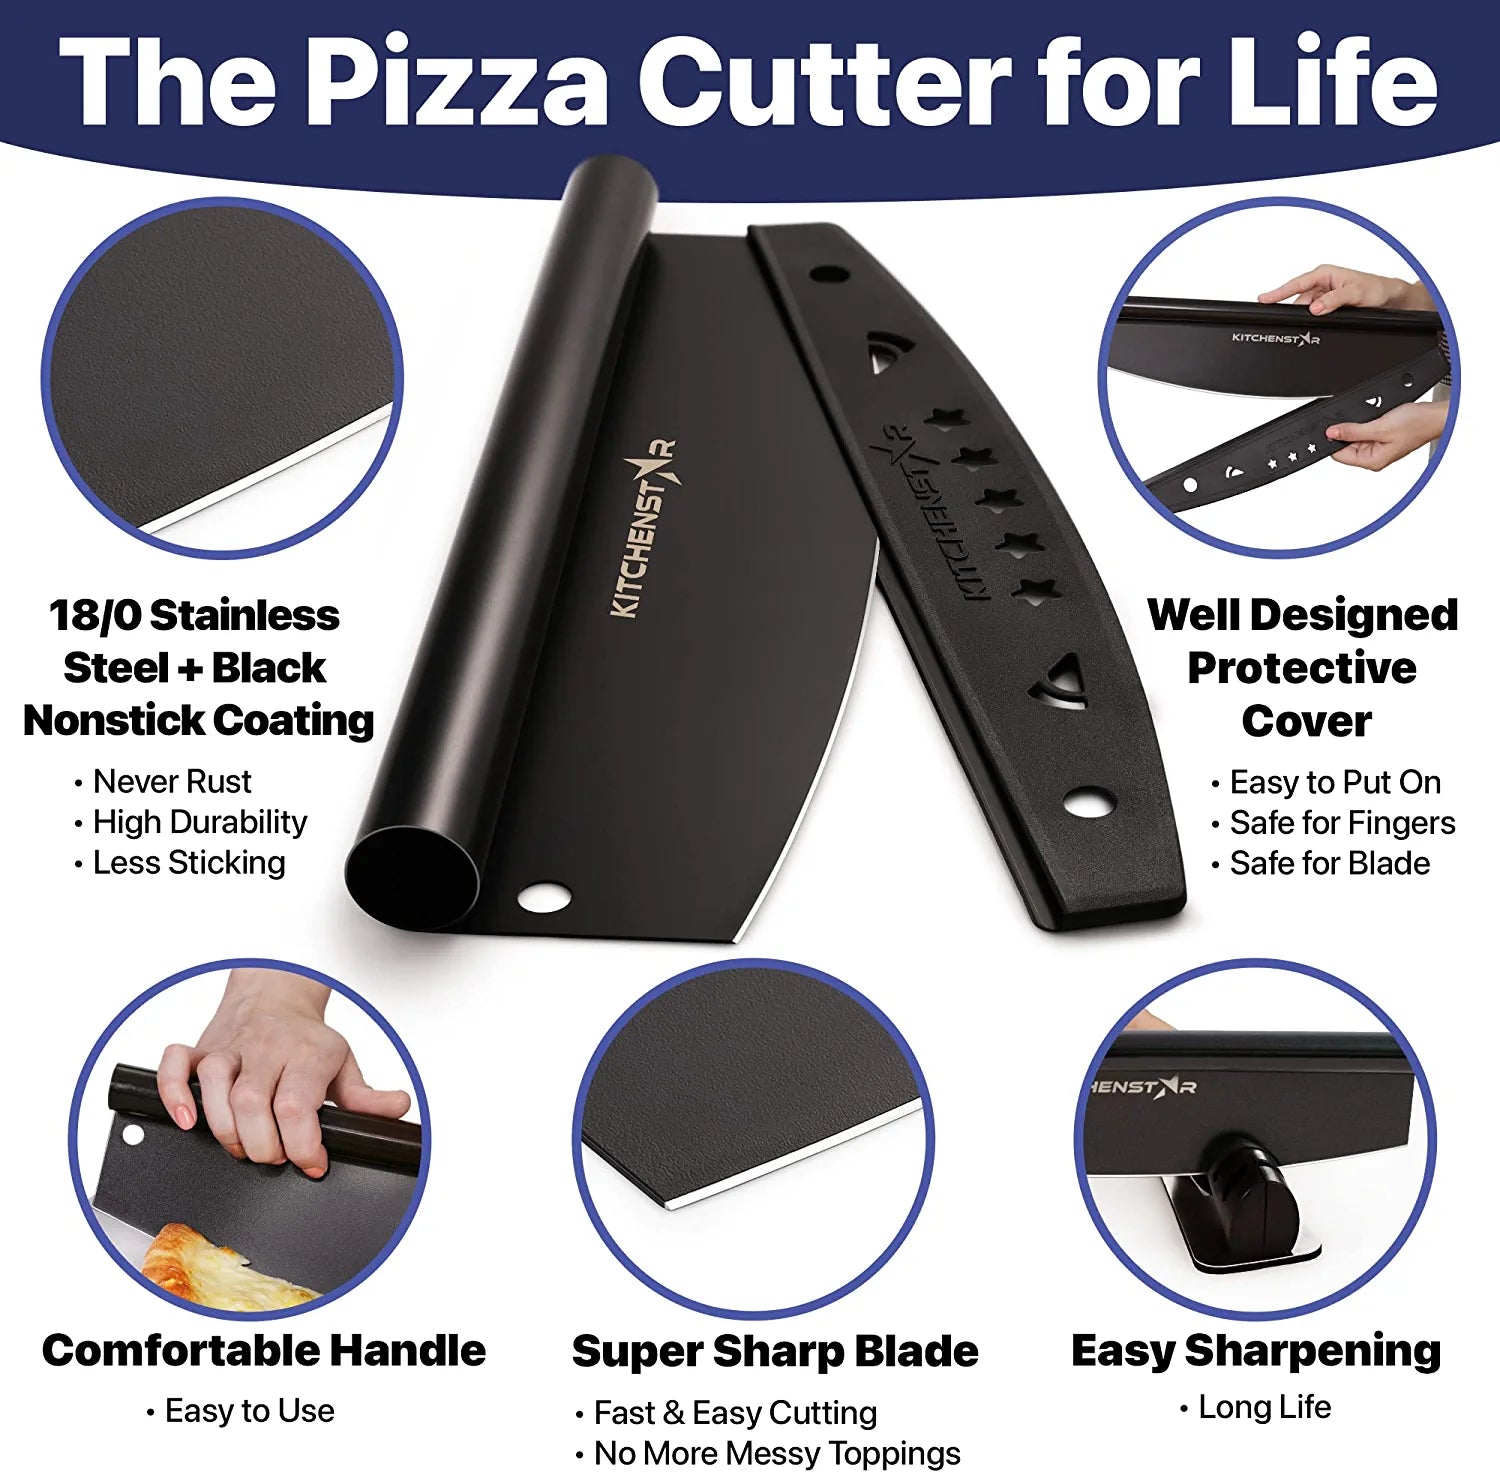 KitchenStar Pizza Cutter Rocker 12 inch - Stainless Steel Pizza Slicer Knife - Black NonStick Sharp Knife with Blade Cover - Pizza Making Tools & Oven Accessories - Dishwasher Safe